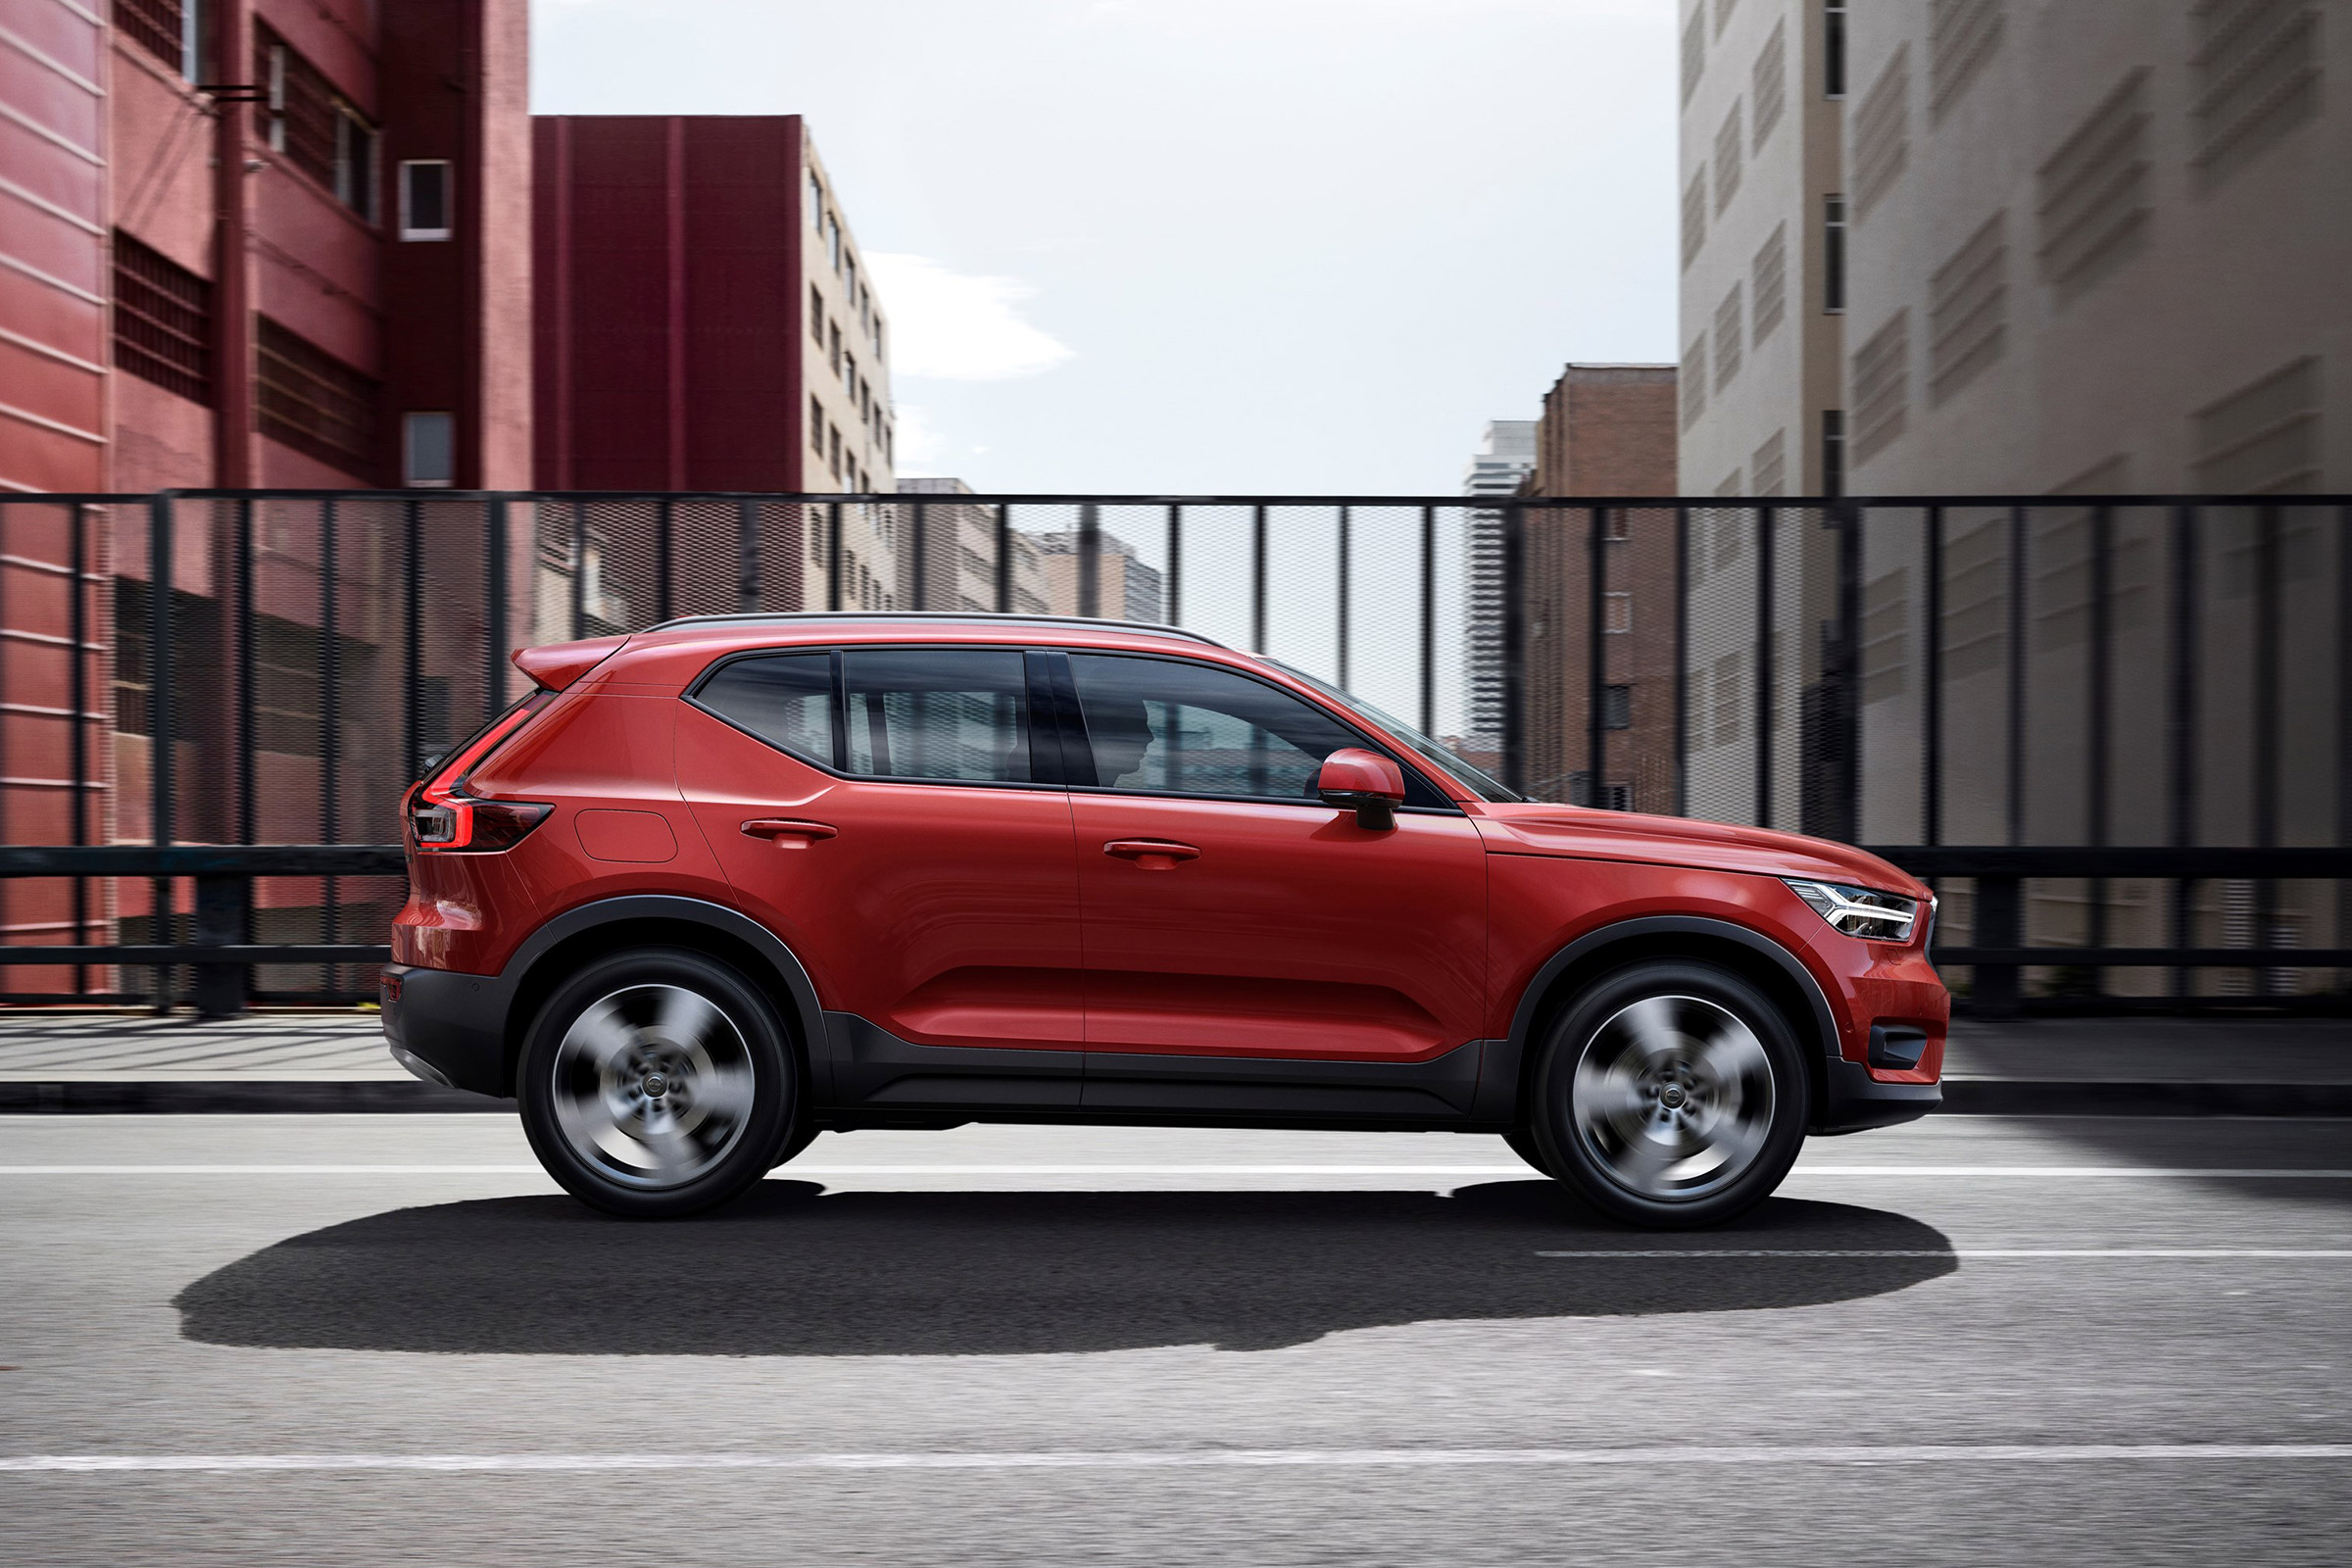 Volvo XC40 - Sweden's take on the compact SUV officially uncovered